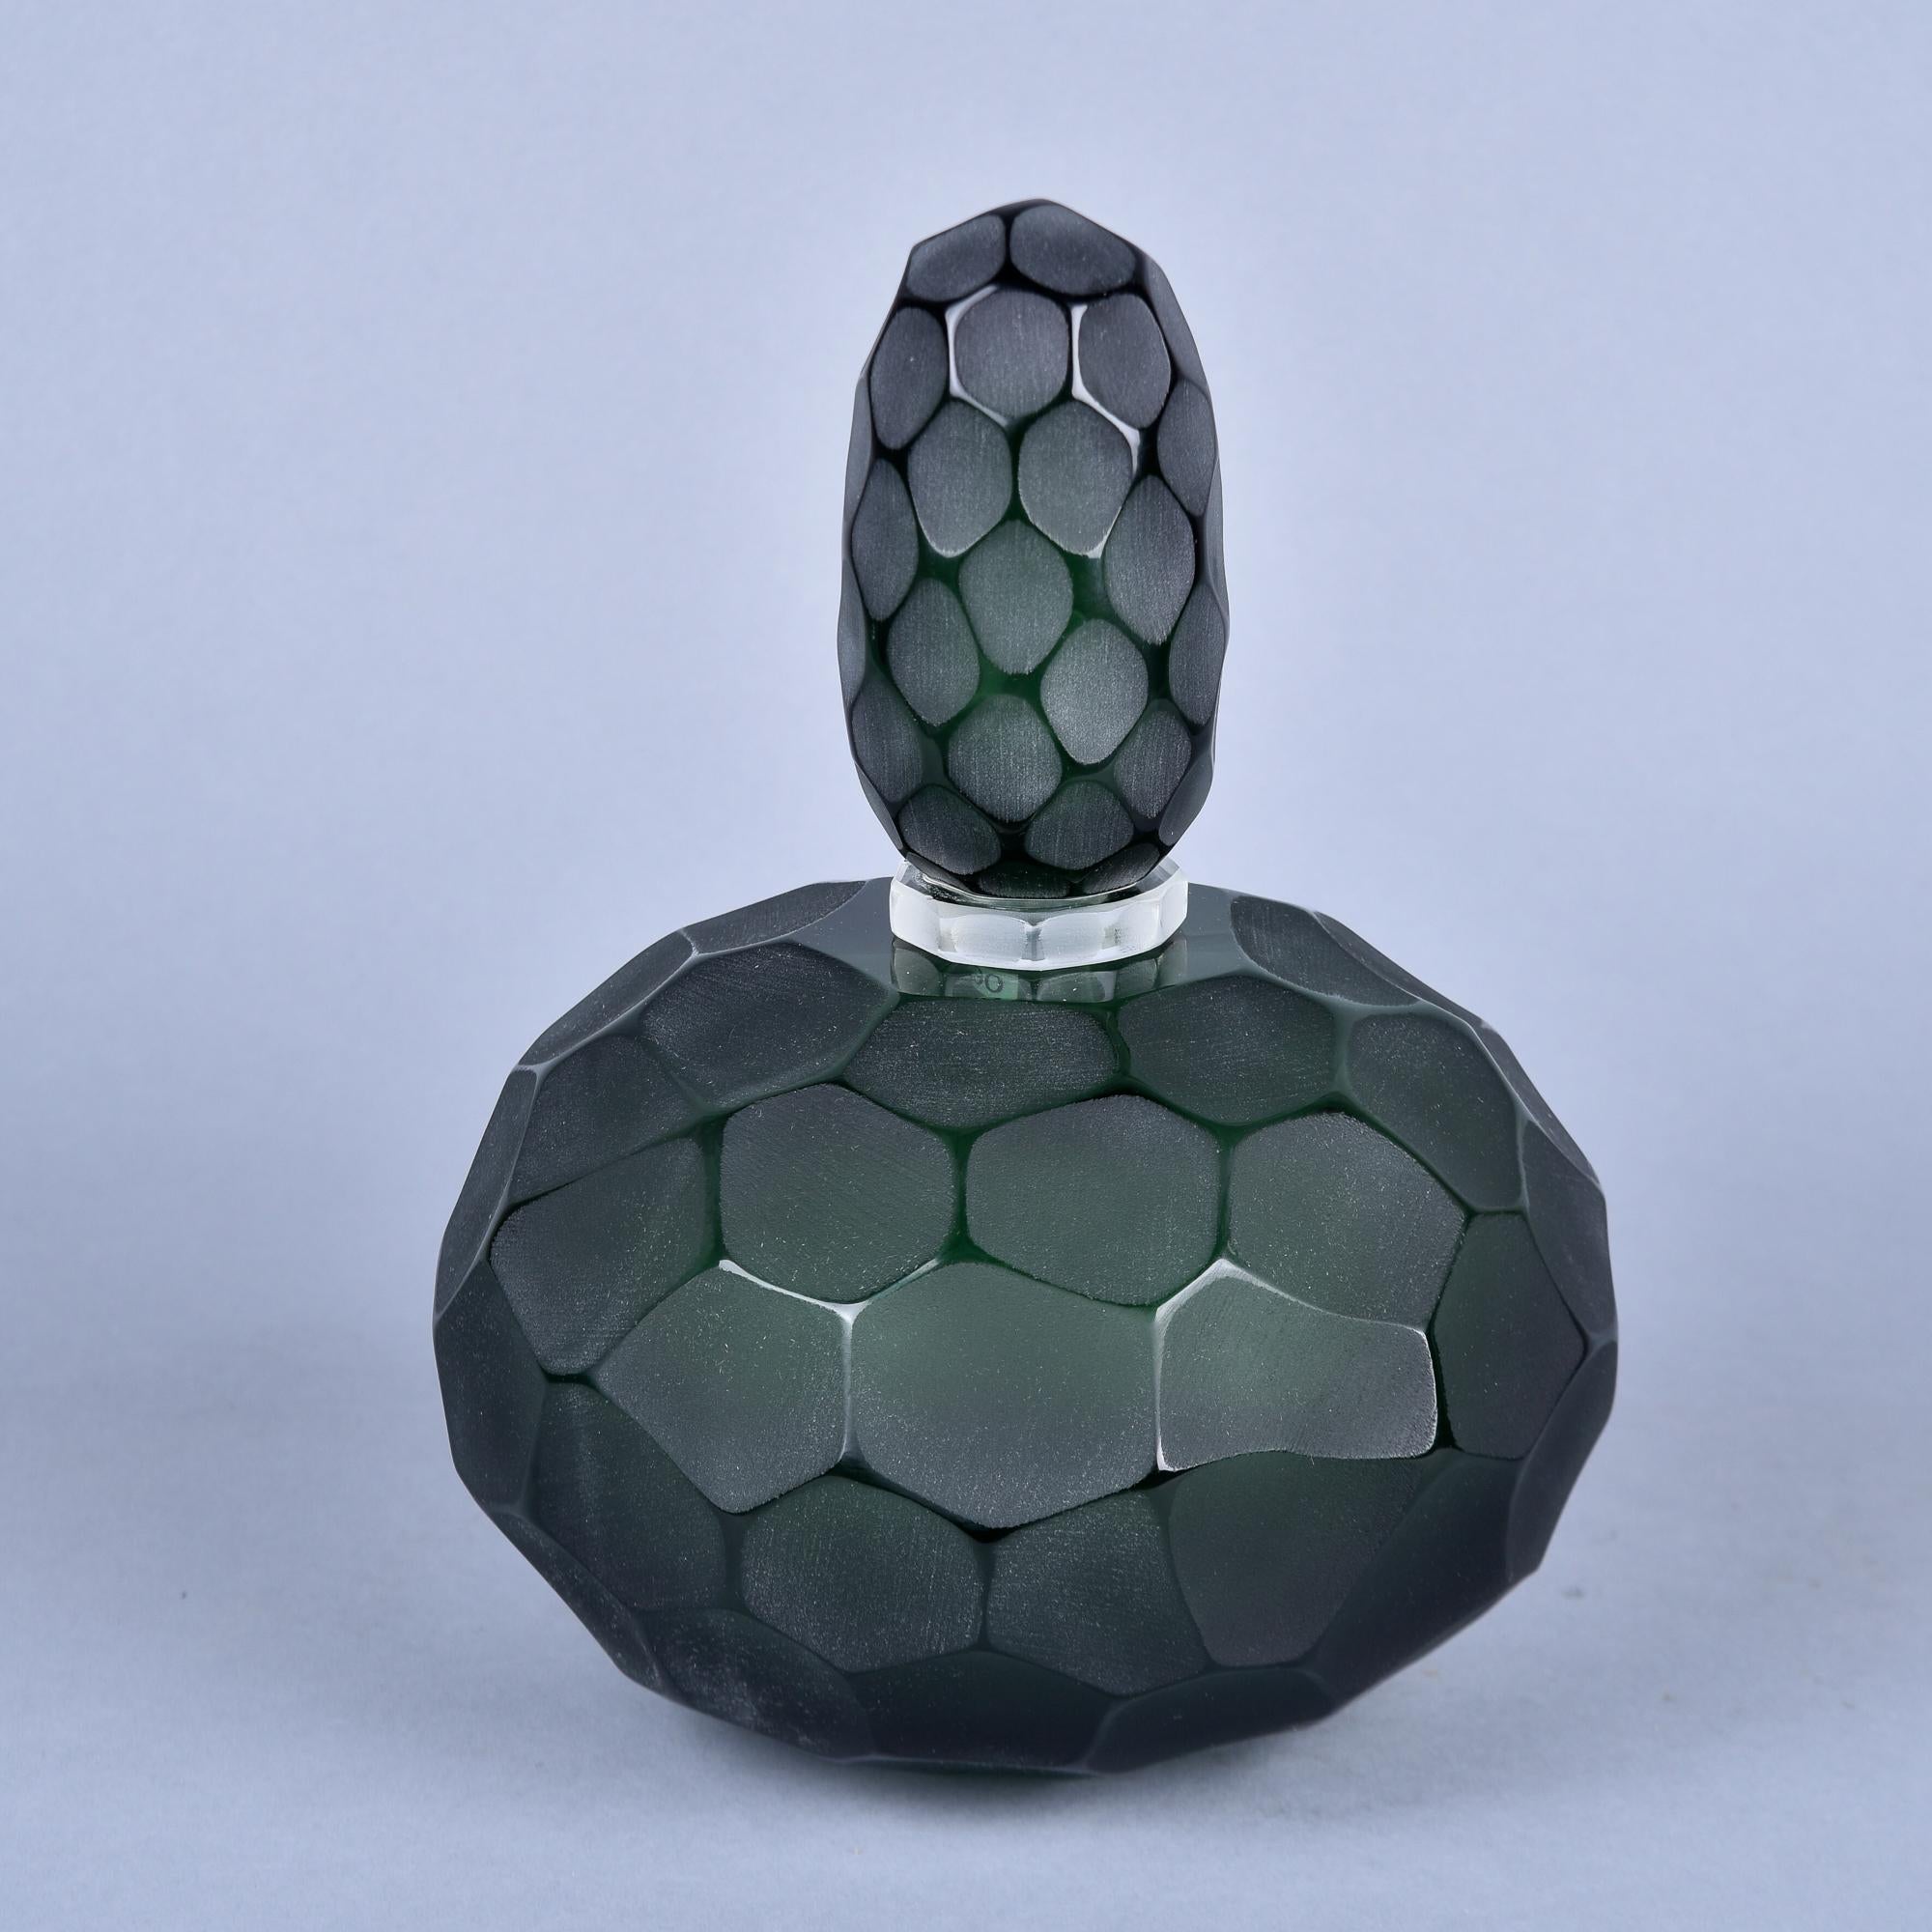 New and made in Italy by an unknown Murano glass maker, this perfume bottle is 11” tall with the stopper on and 8.5” diameter. Heavy, dark bottle green glass has cut and polished surface detail - called battuto in Italian - which provides an